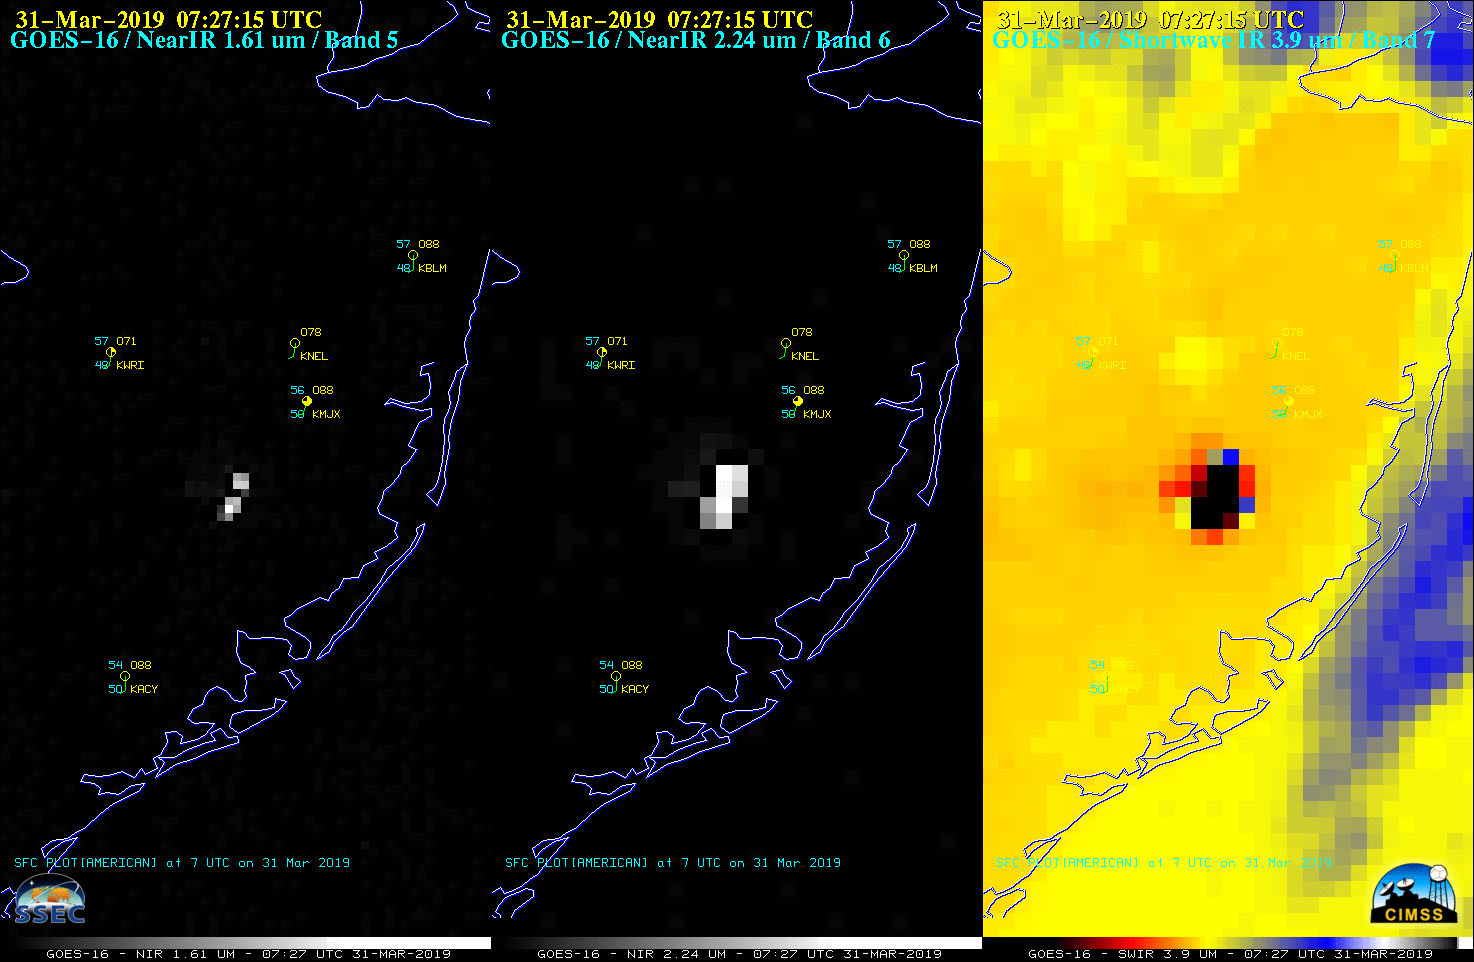 GOES-16 Near-Infrared “Snow/Ice” (1.61 µm, left), Near-Infrared “Cloud Particle Size” (2.24 µm, center) and Shortwave Infrared (3.9 µm, right) images [click to play animation | MP4]